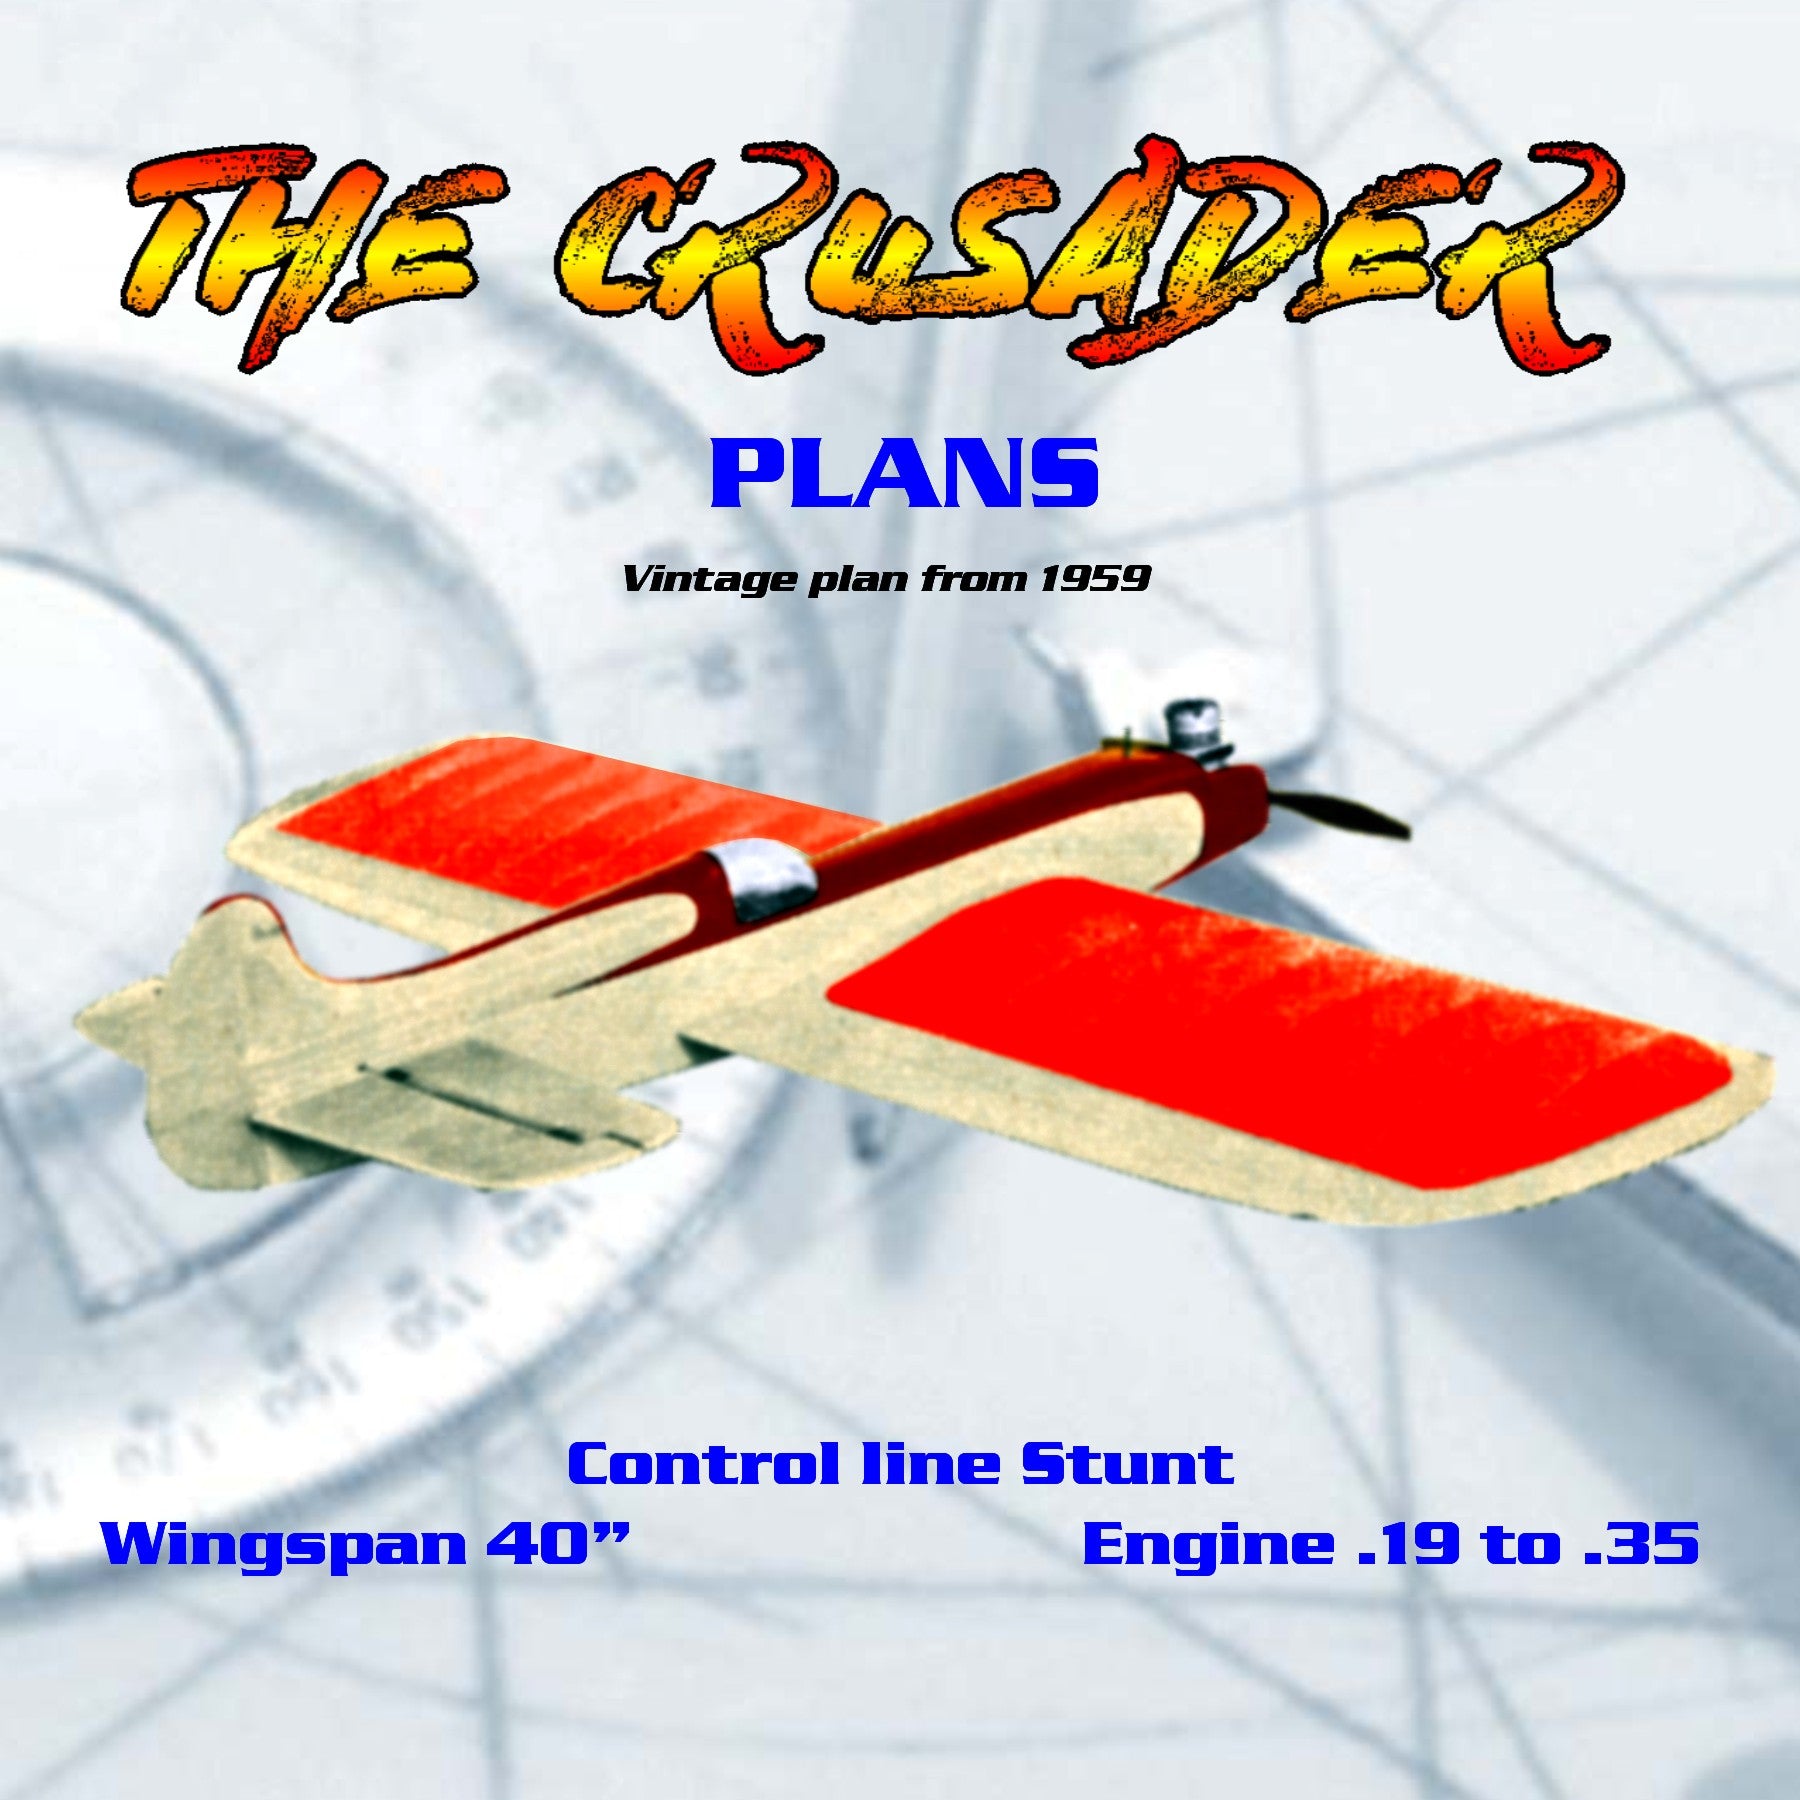 full size printed plans  vintage plan 1959 control line stunt crusader  "i wish i could do that?" you can!